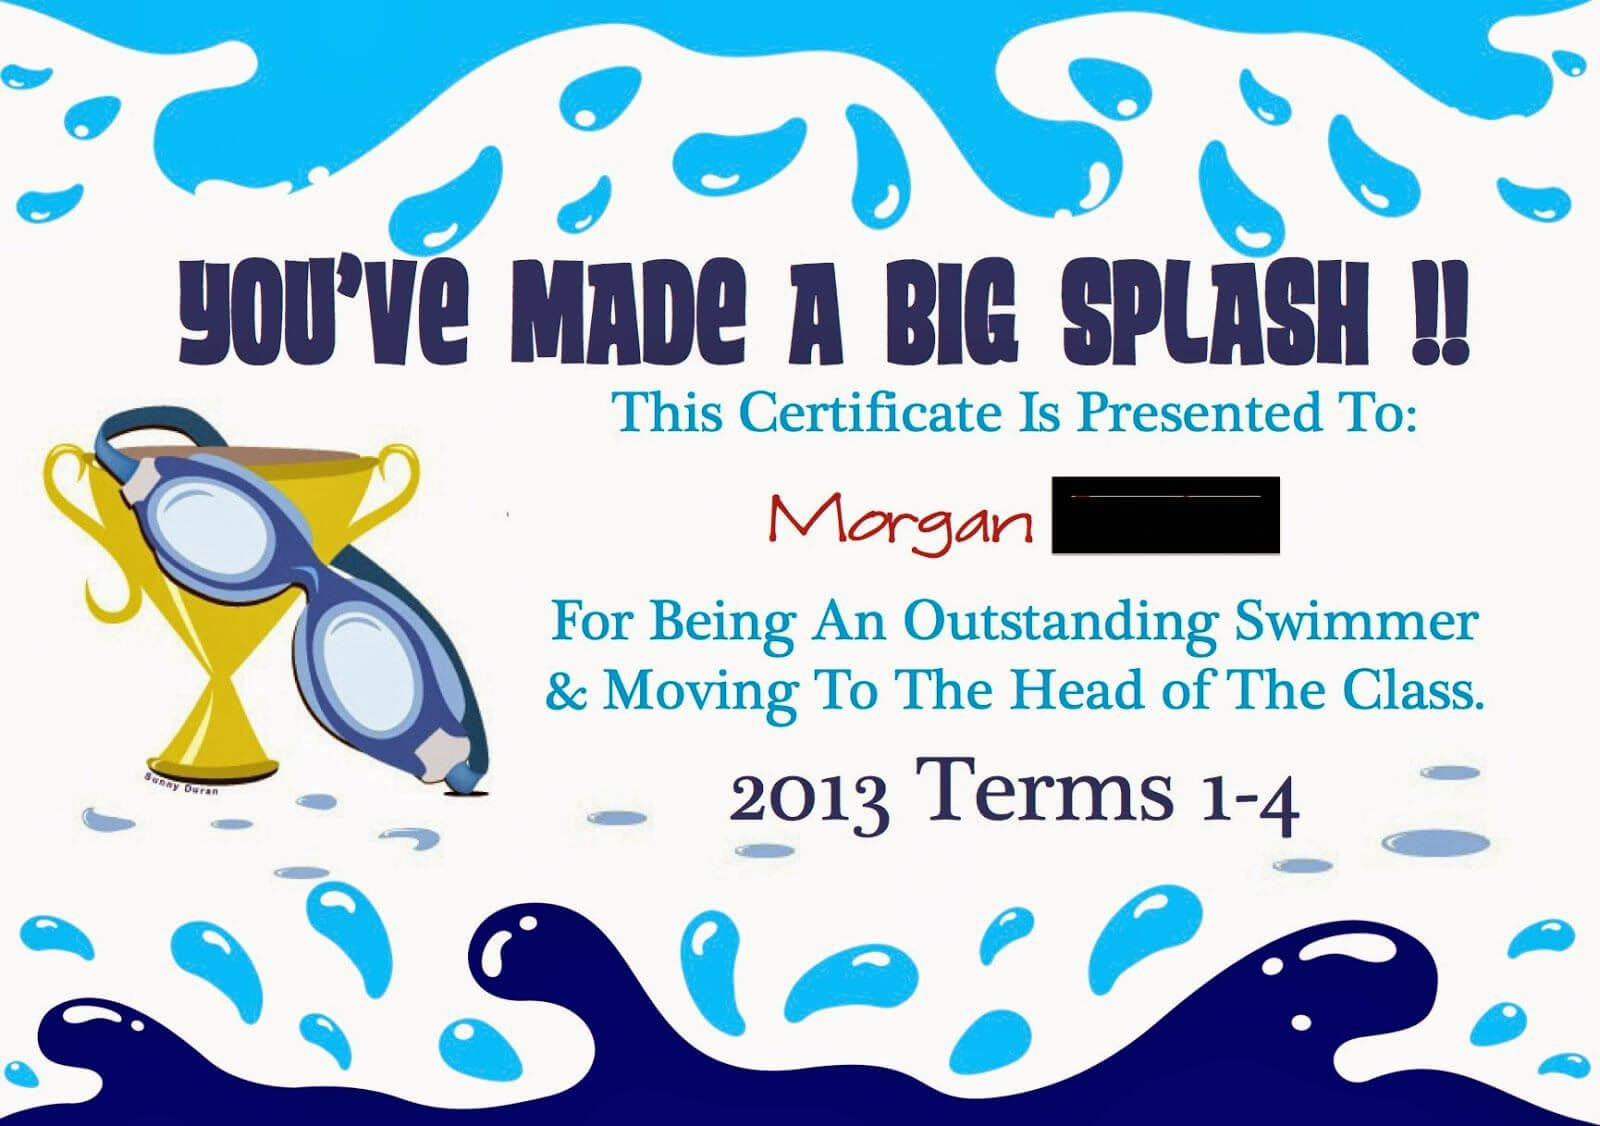 Pinmarwa Mattar On Swimming | Swimming Lessons For Kids In Swimming Certificate Templates Free